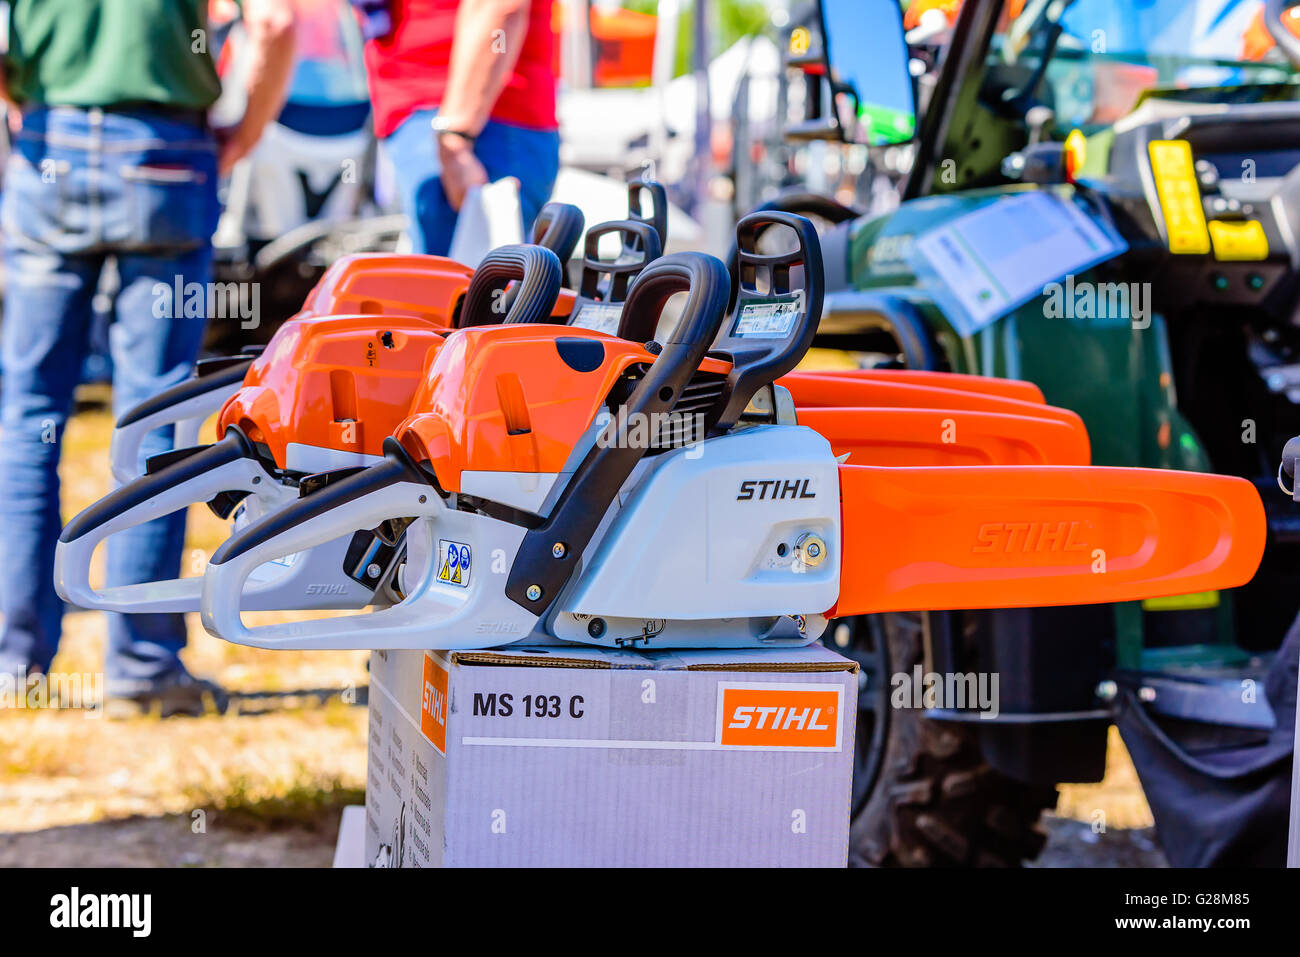 Emmaboda, Sweden - May 13, 2016: Forest and tractor (Skog och traktor) fair. Stihl chainsaw on display with people in the backgr Stock Photo